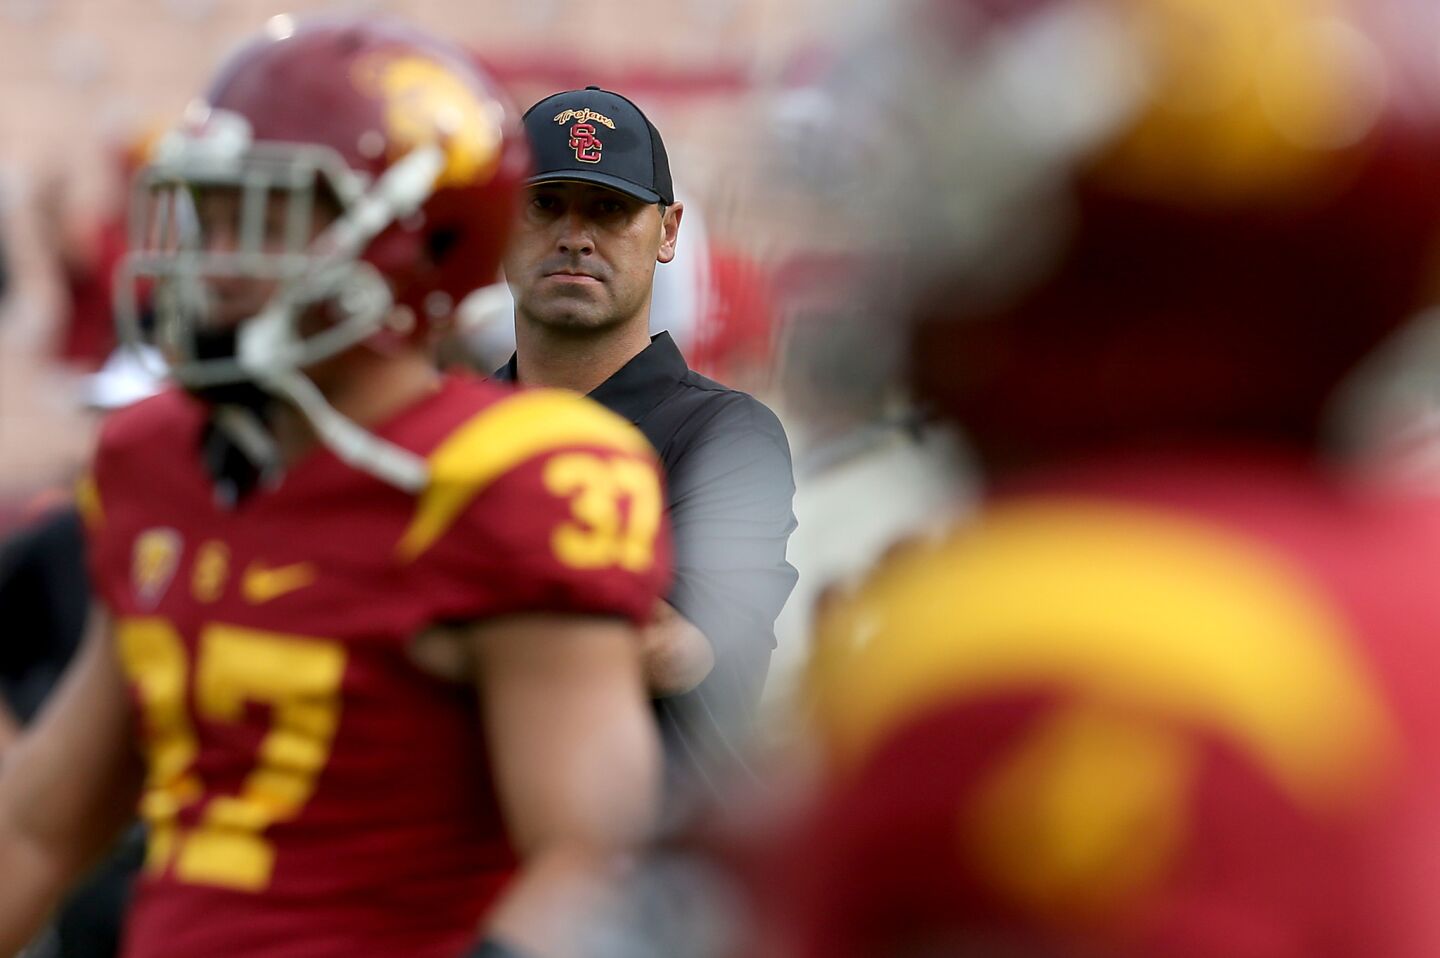 USC Coach Steve Sarkisian watches his Trojans squad warm-up before the game against Idaho on Sept. 12, 2015.